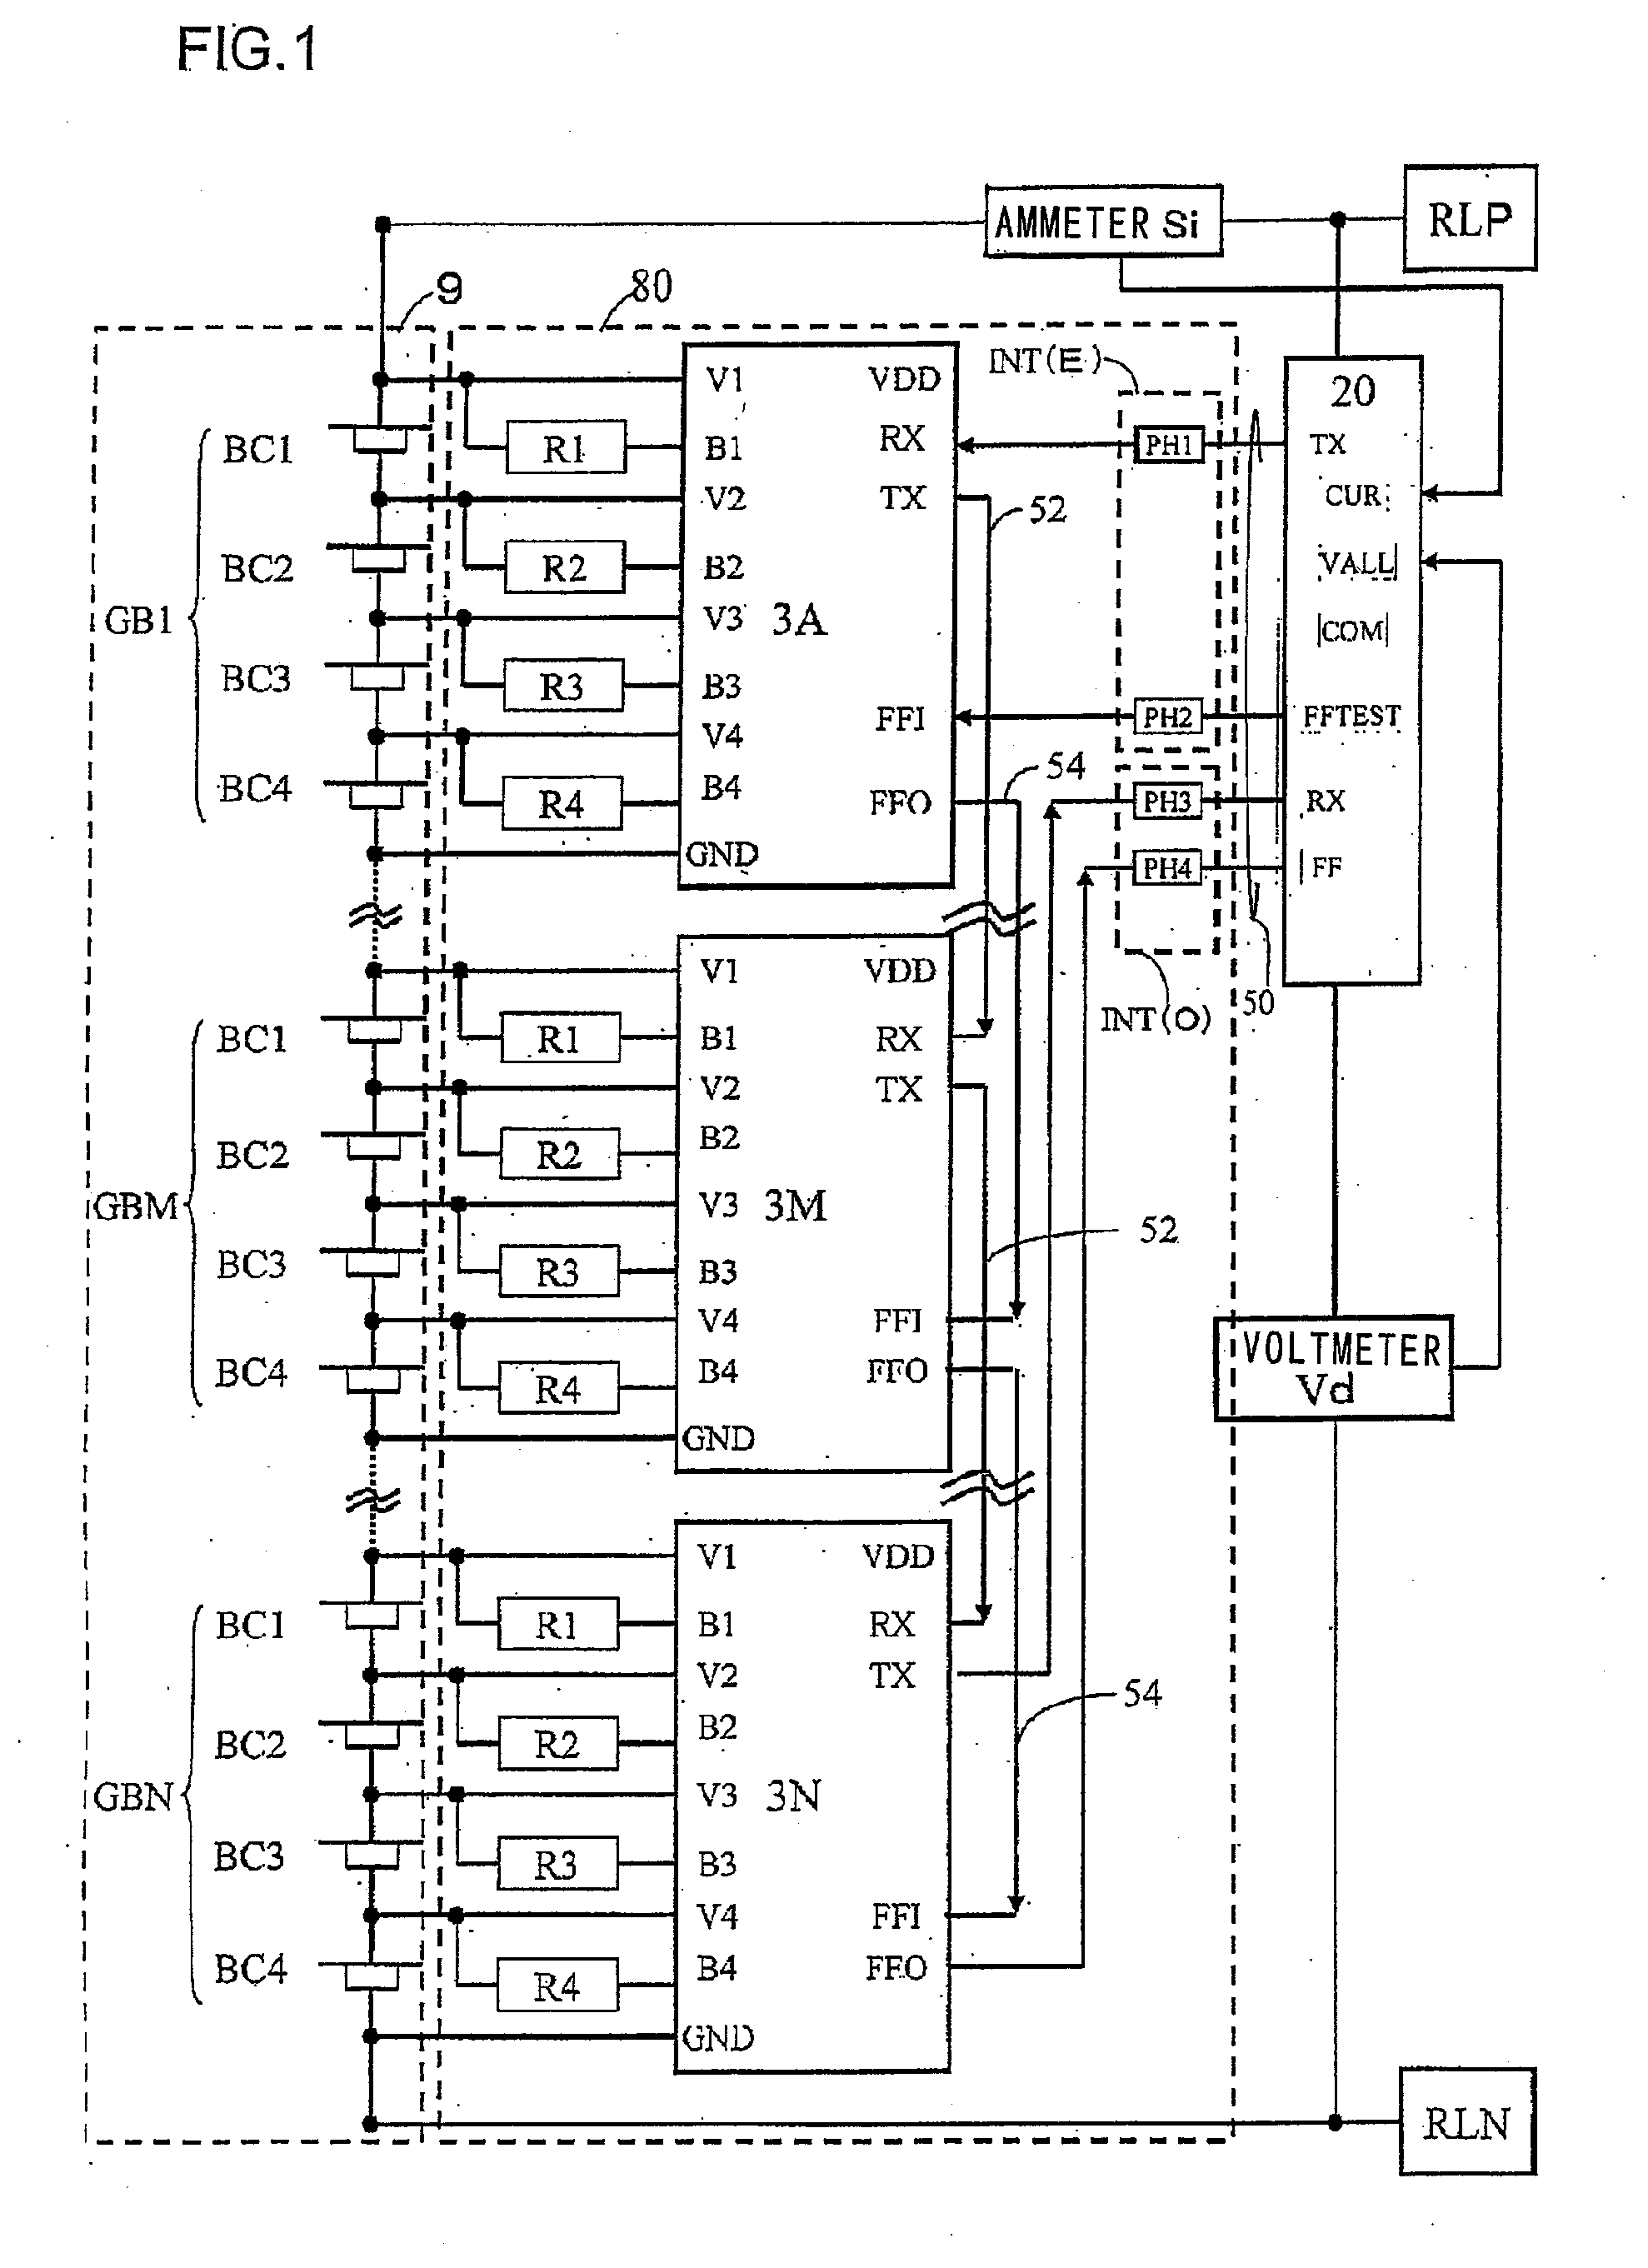 Multi-Series Battery Control System